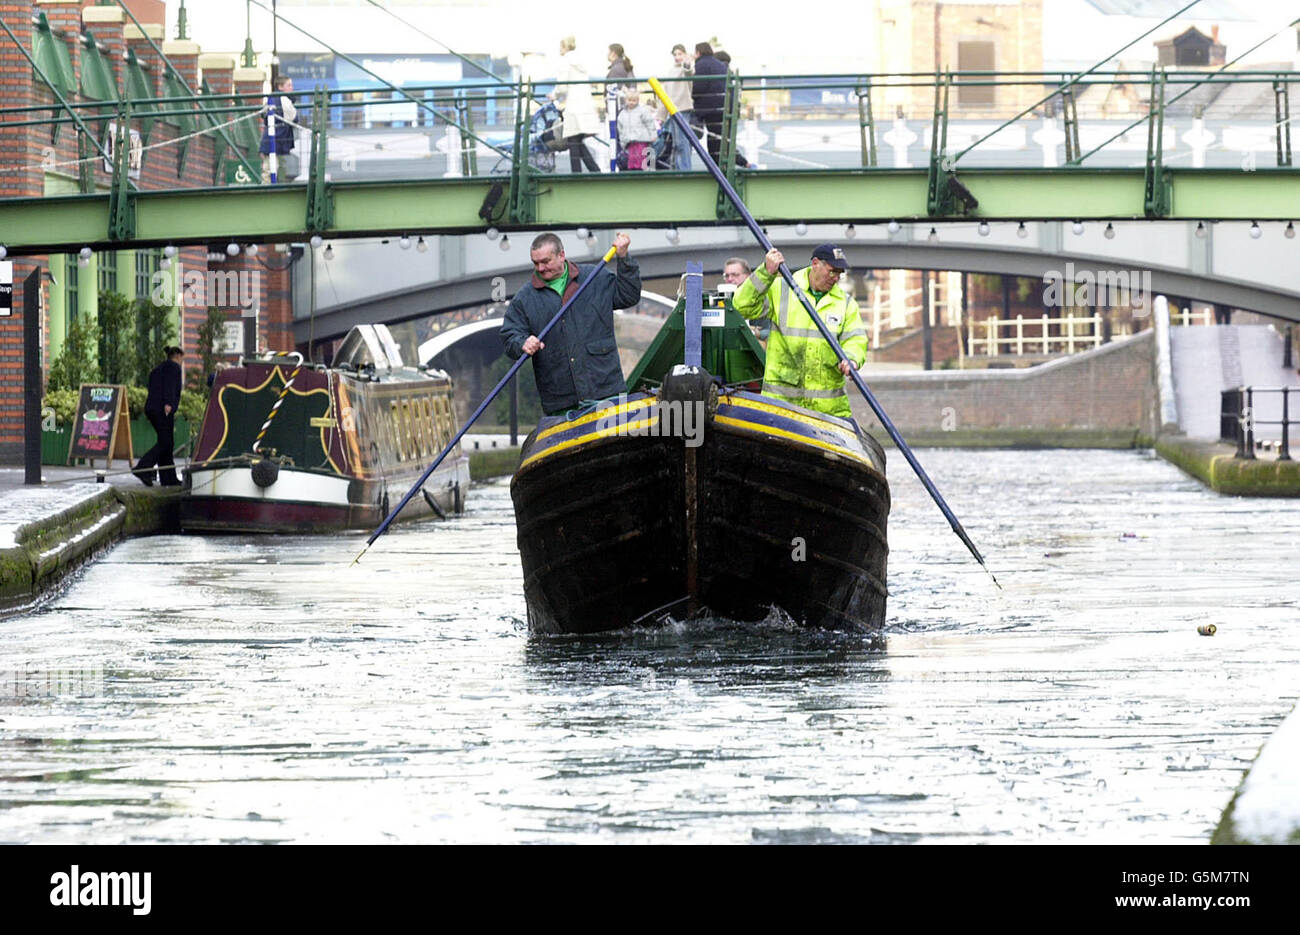 British Waterways Icebreaker boat, The through the ice at Brindley Place in Using traditional narrowboats with a V-shaped prow, teams of engineers breaking up swathes of ice which